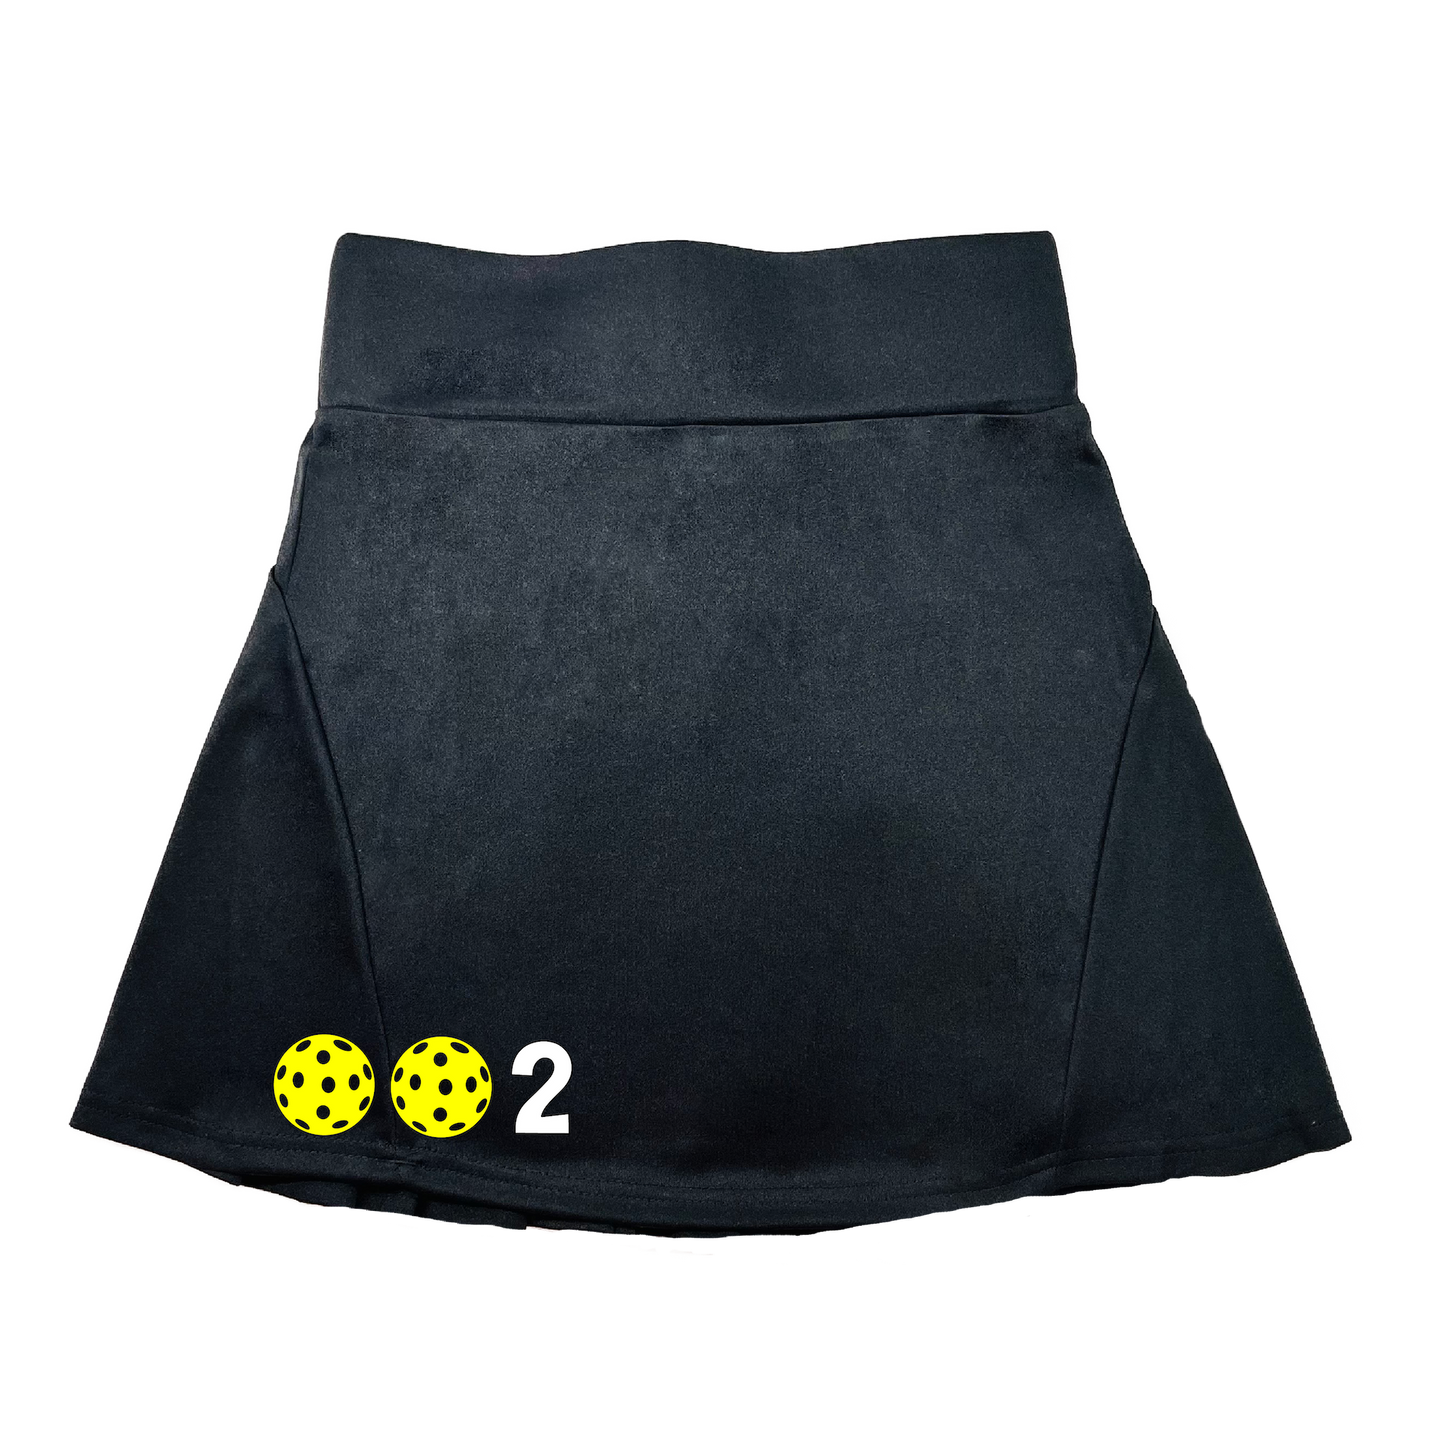 Pickleball Flirty Skort Design: 002 Customizable Pickleball Ball color:  Choose: White, Yellow or Pink.  These flirty skorts have a flat mid-rise waistband with a 3-inch waistband.  Light weight without being see through and the material wicks away moisture quickly.  Flirty pleats in the back with inner shorts for free movement and stylish coverage on the courts.  A functional zipper pocket on the back and two built in pockets on the shorts for convenient storage. 